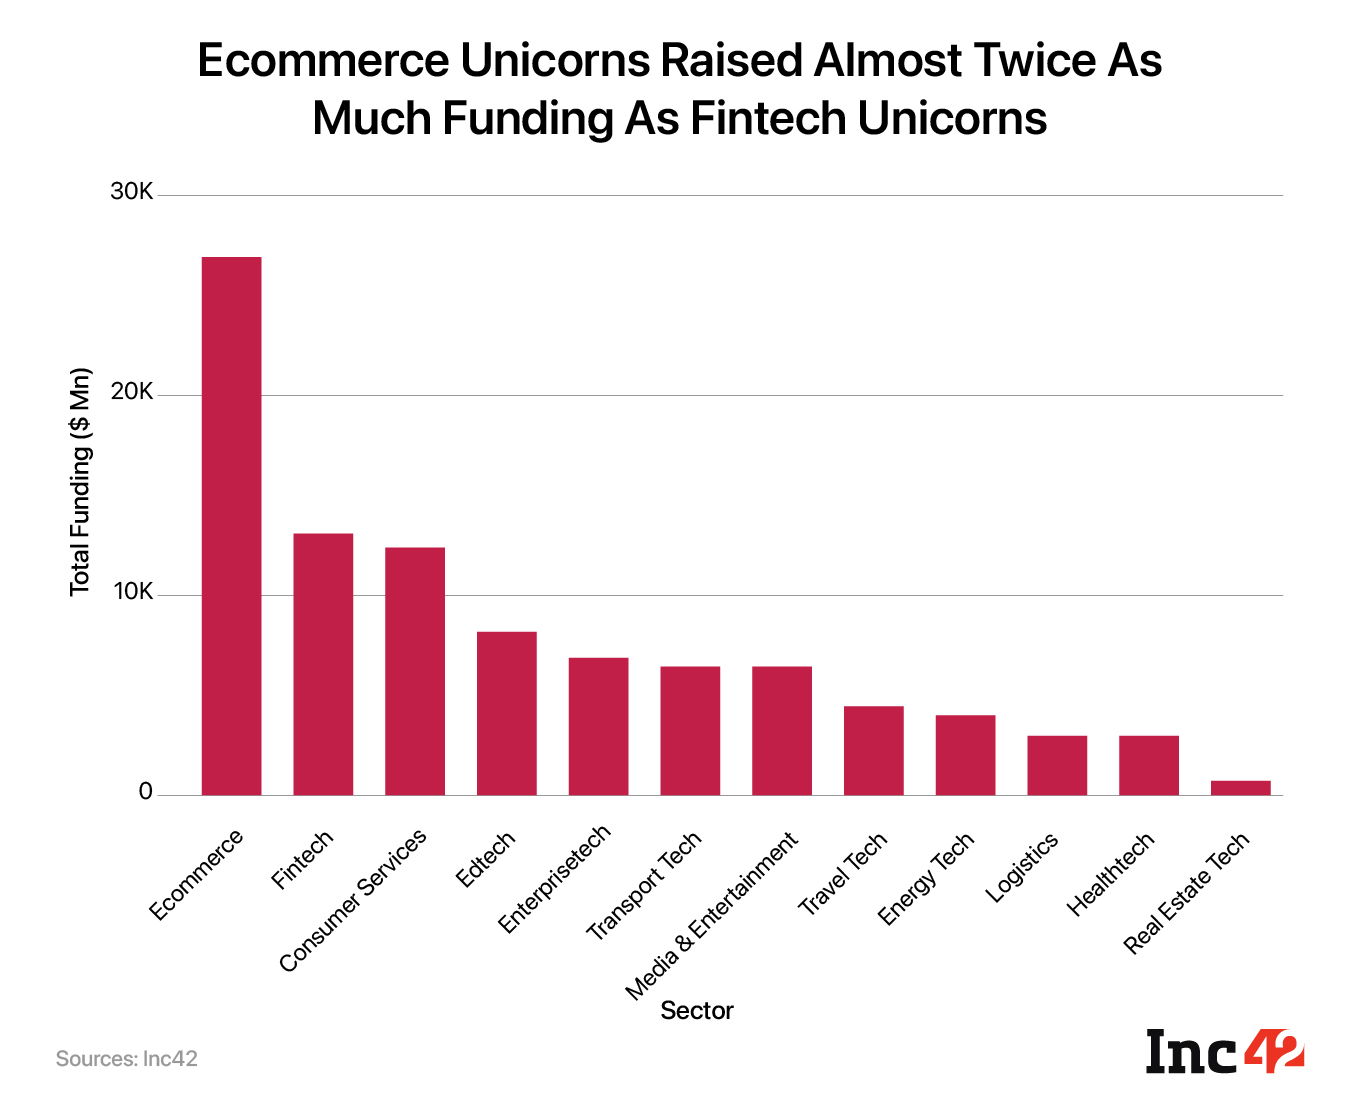 Ecommerce unicorns have raised the most funding to date